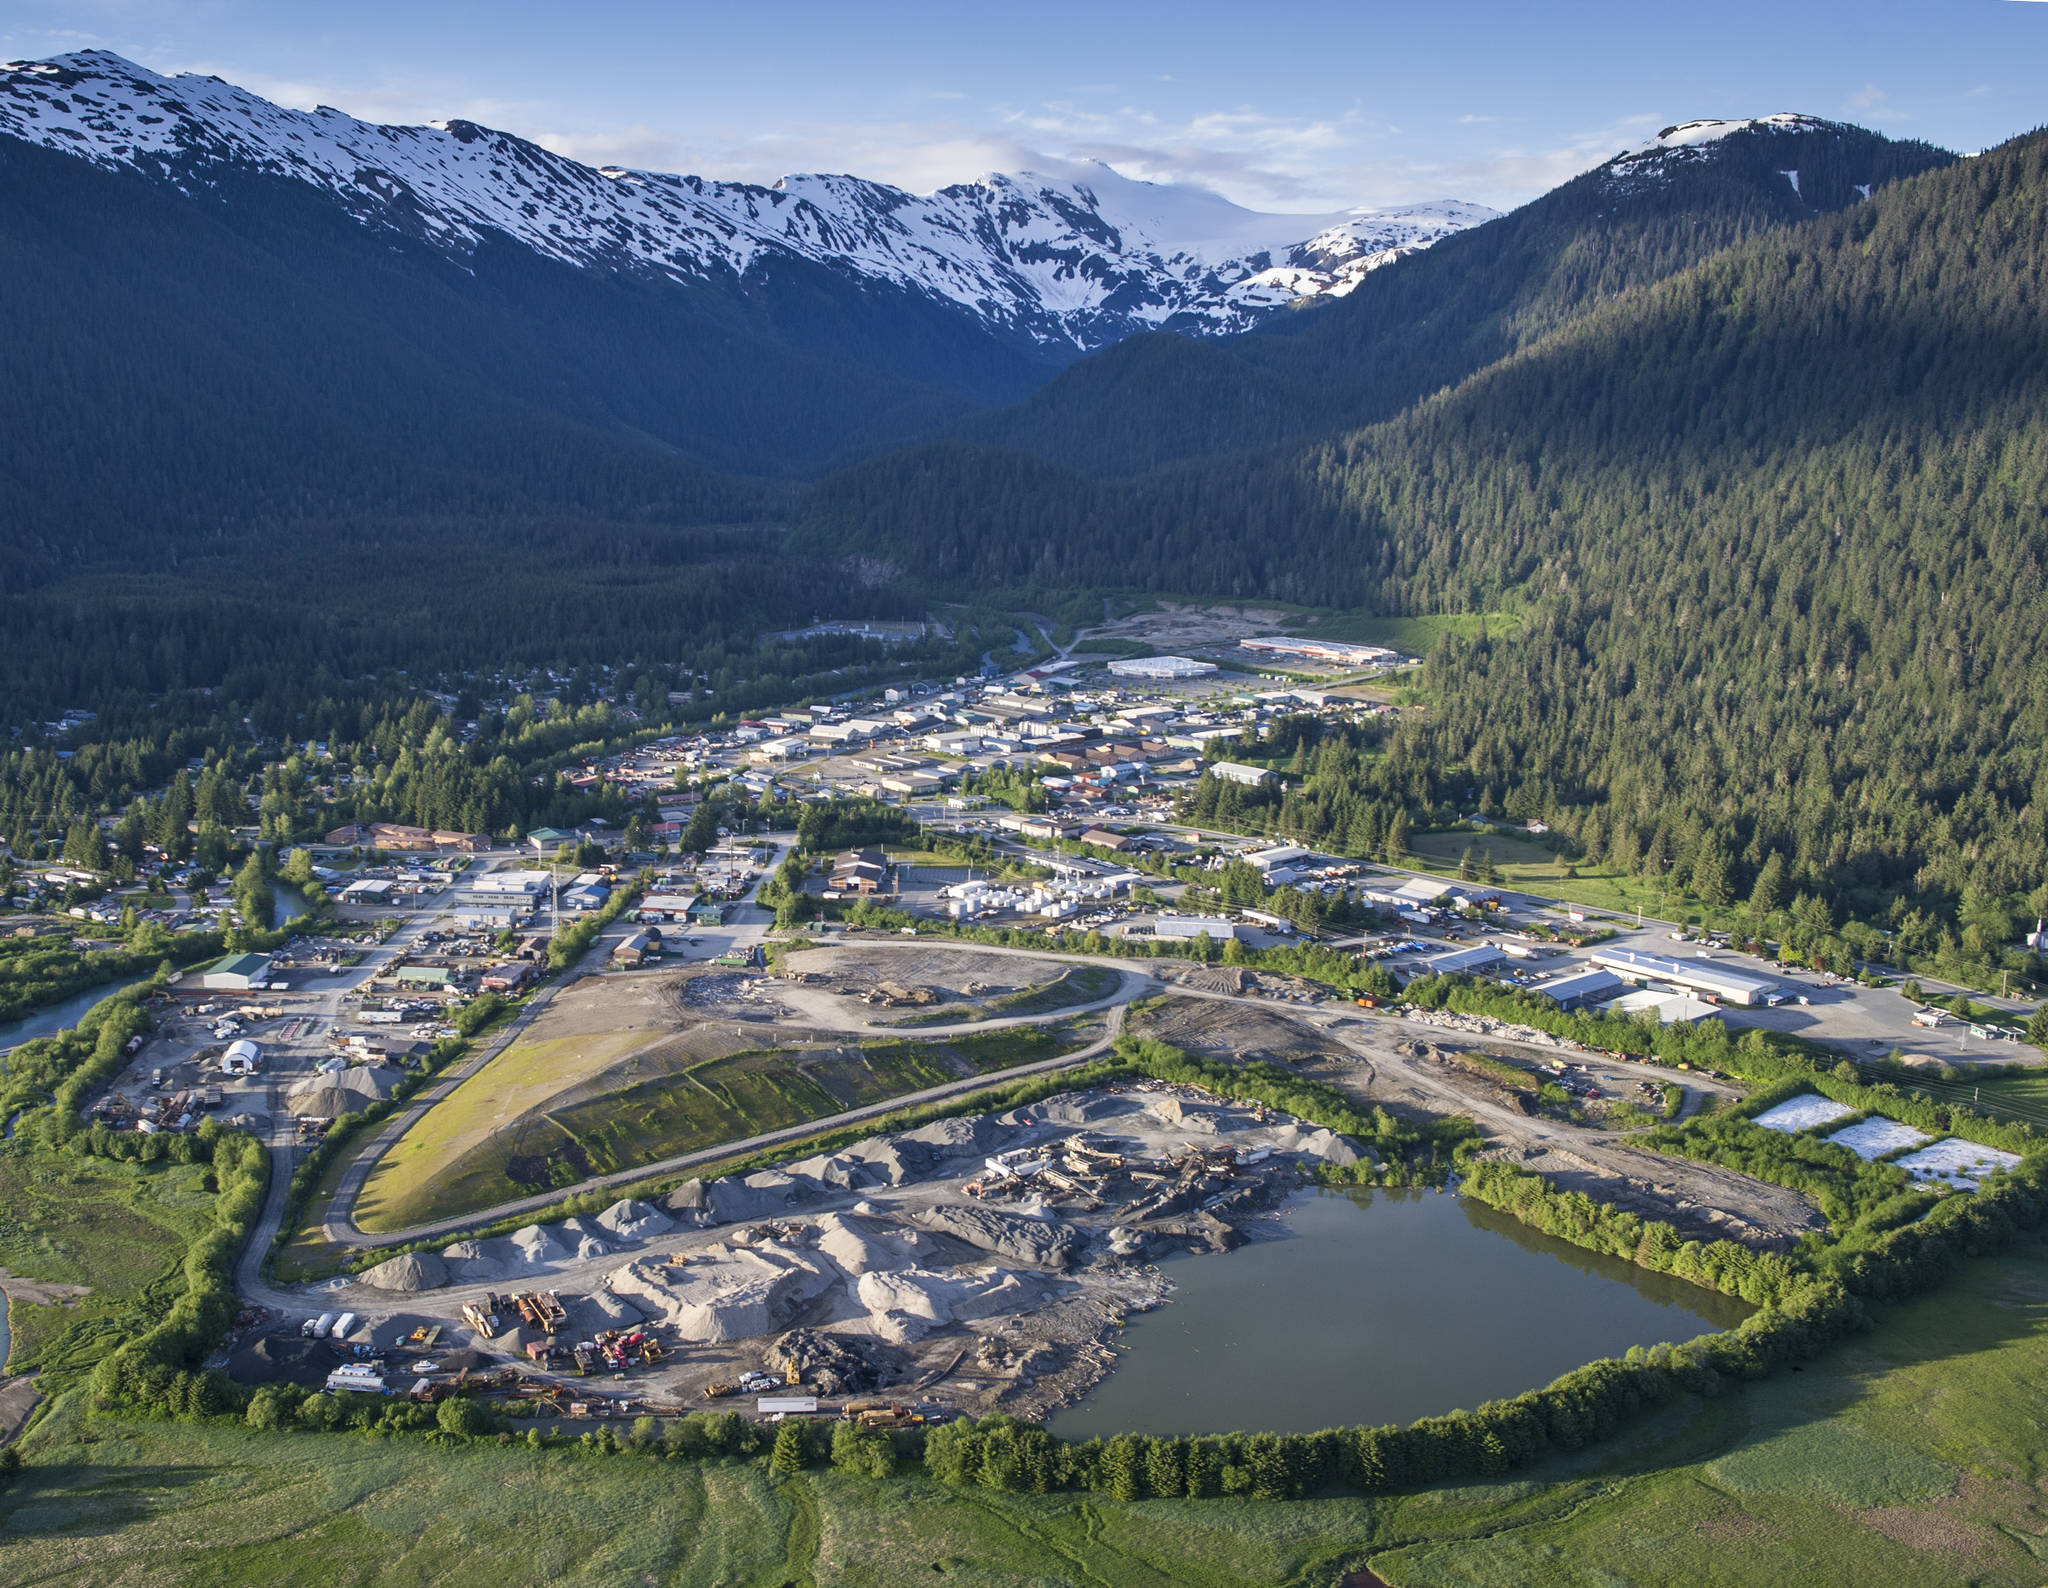 Juneau’s Capitol Disposal Landfill, seen in this June 2013 photo, sits in the middle of the industrial Lemon Creek district. Recent complaints about odors coming from the location prompted the city to discuss this issue at their Monday night Committee of the Whole meeting. Private ownership of trash collection and the landfill mean the city has limited options for action. (Michael Penn / Juneau Empire File)